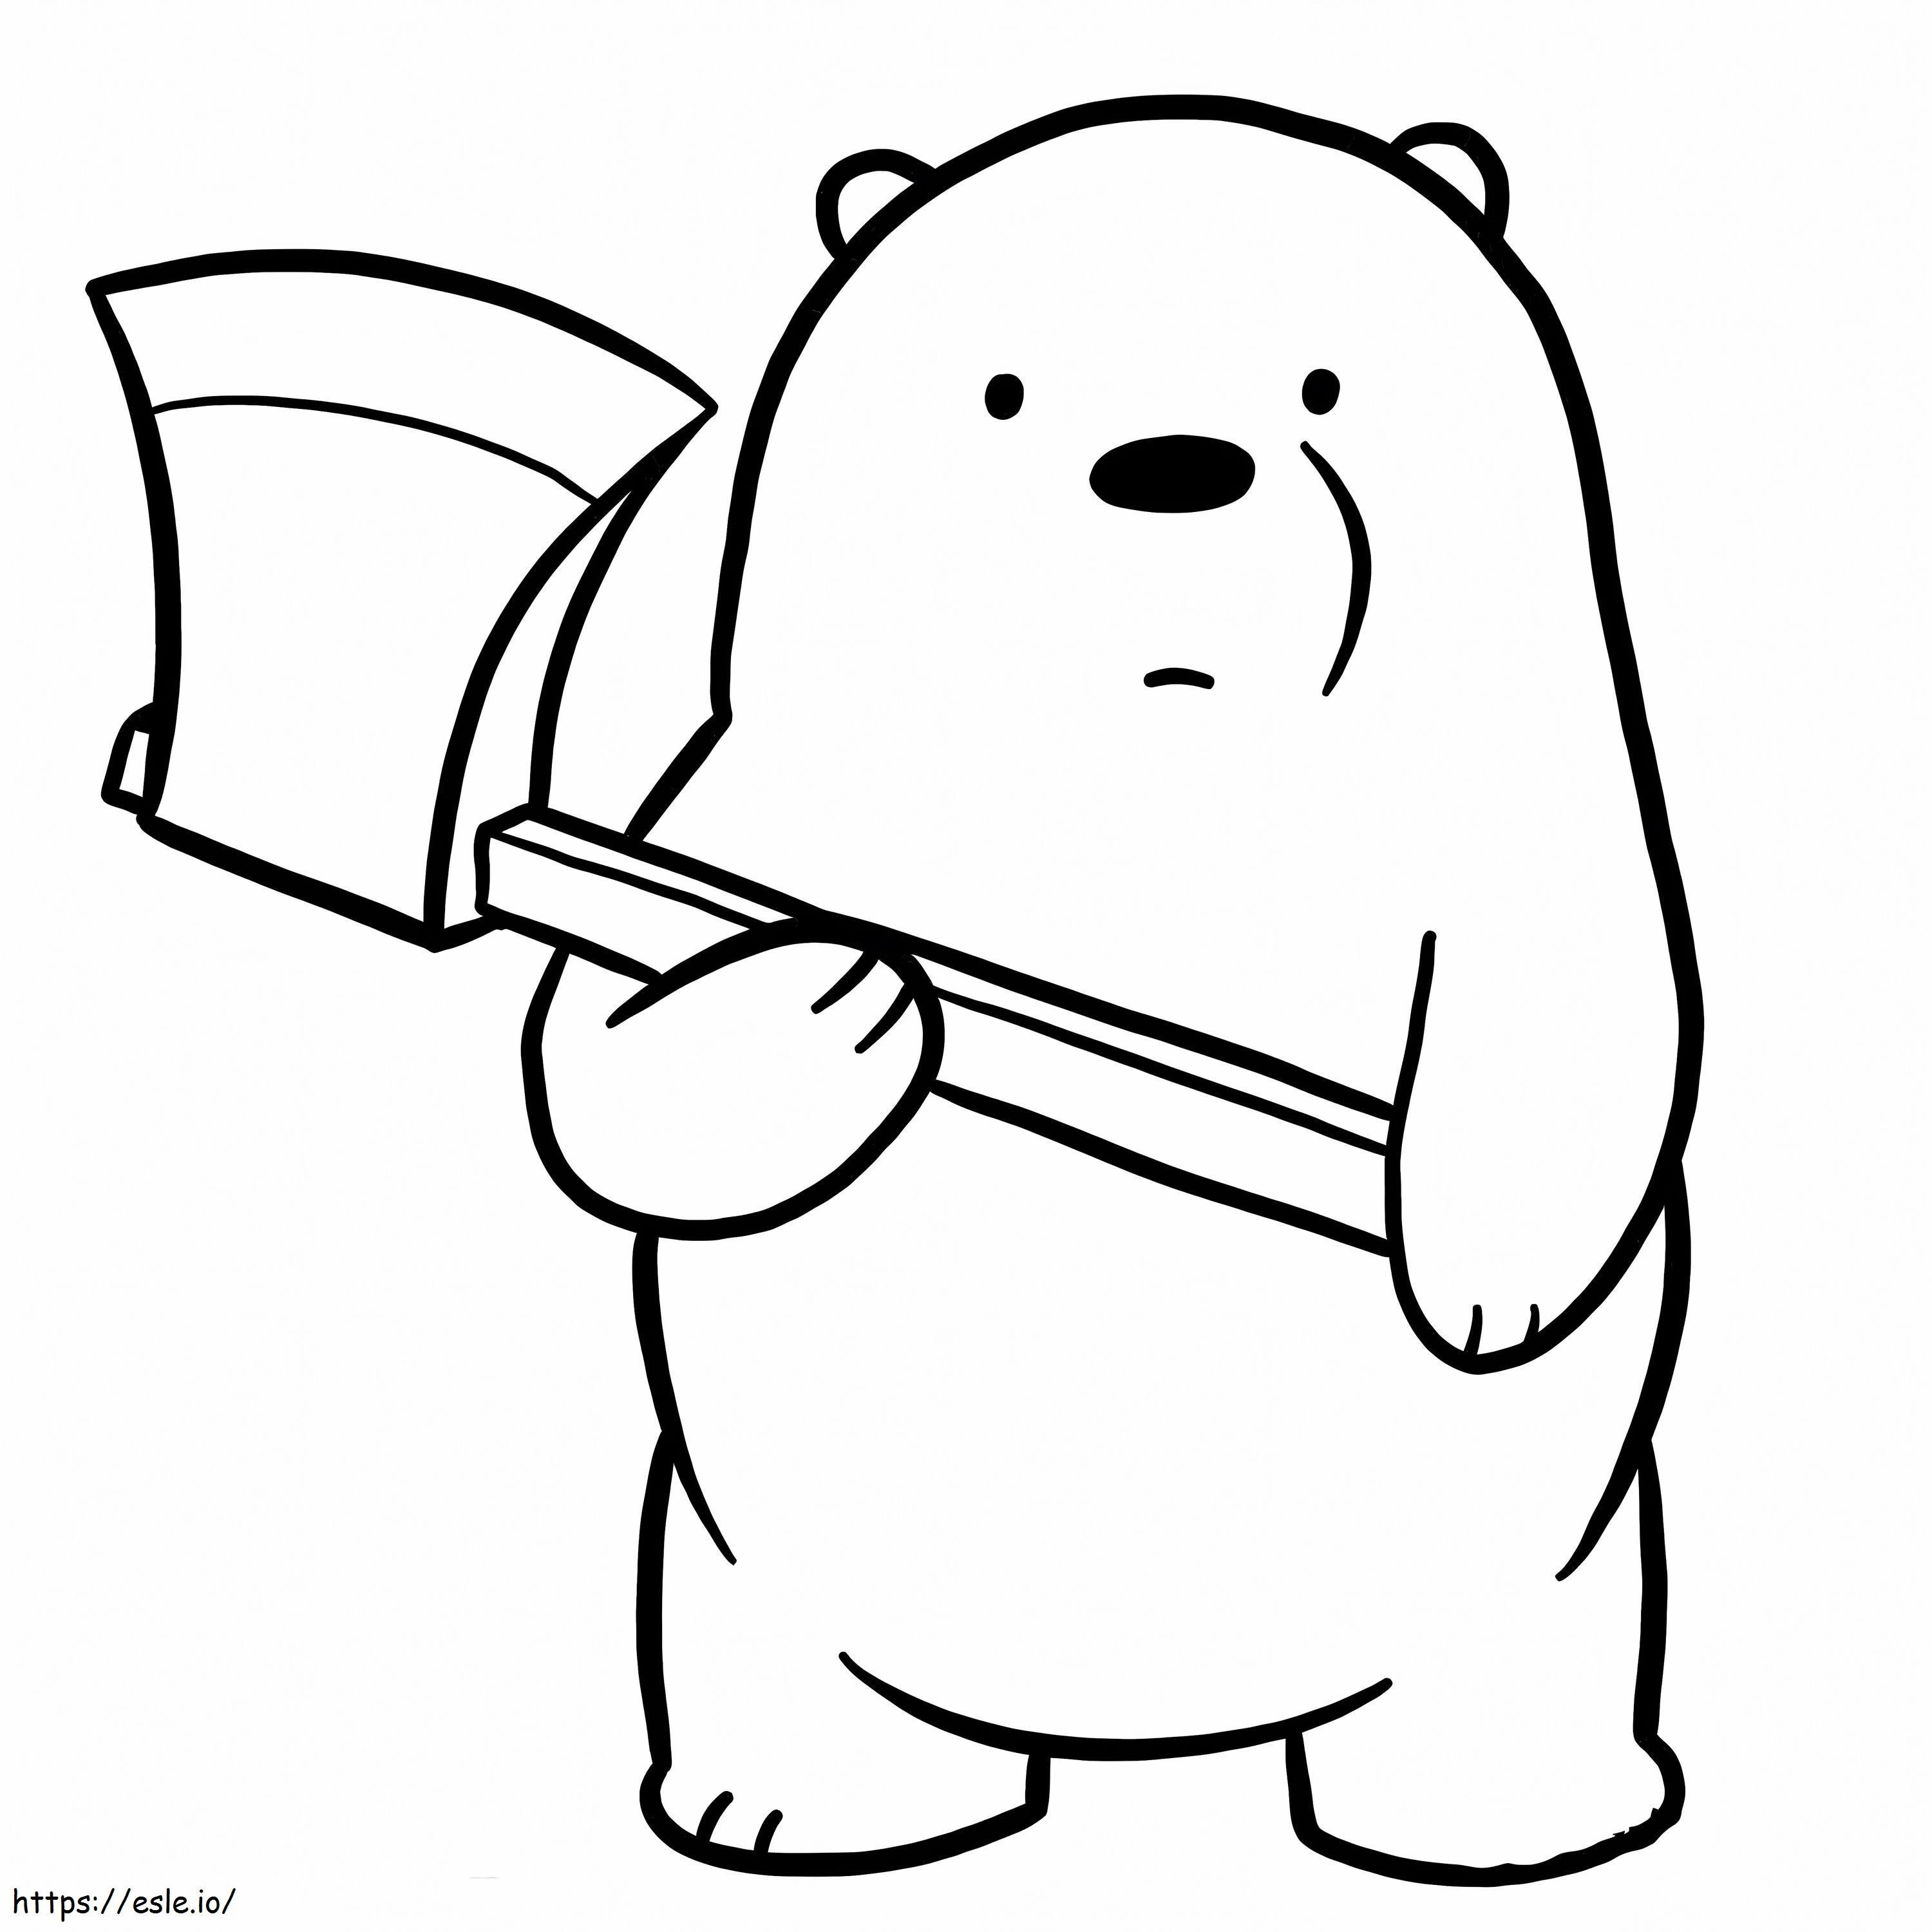 Grizzly'S Grasp Ax coloring page